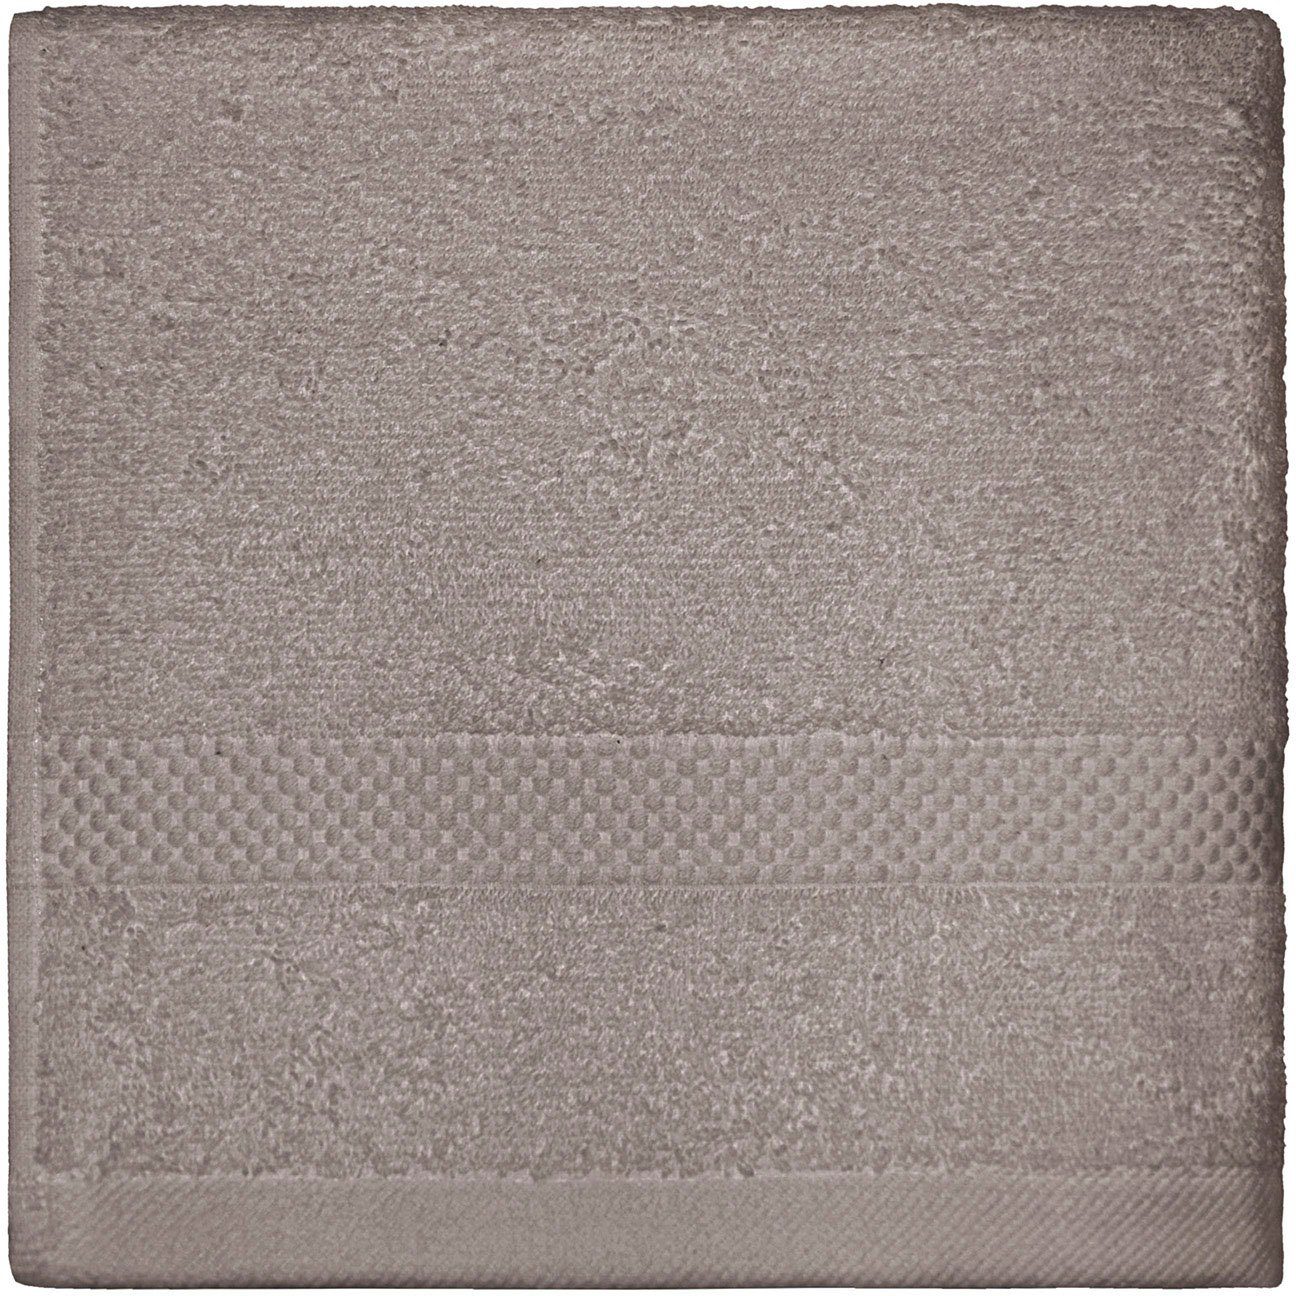 Dyckhoff Handtuch Planet, Walkfrottier (1-St) taupe